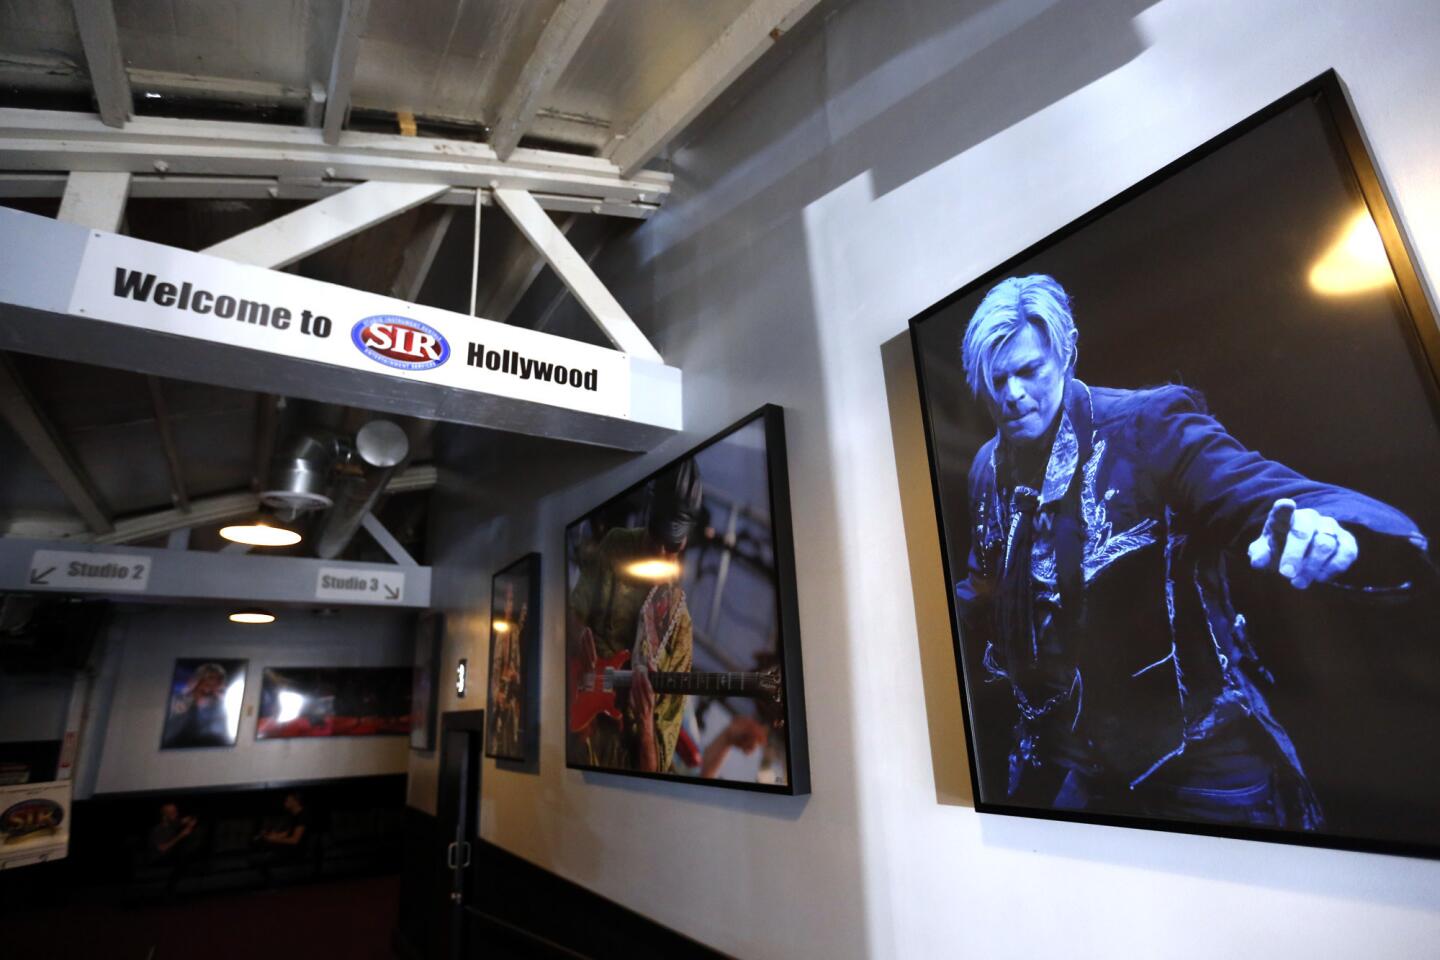 A gallery of photographs, including the late David Bowie, welcomes visitors to Studio Instrument Rentals (SIR) in Los Angeles.